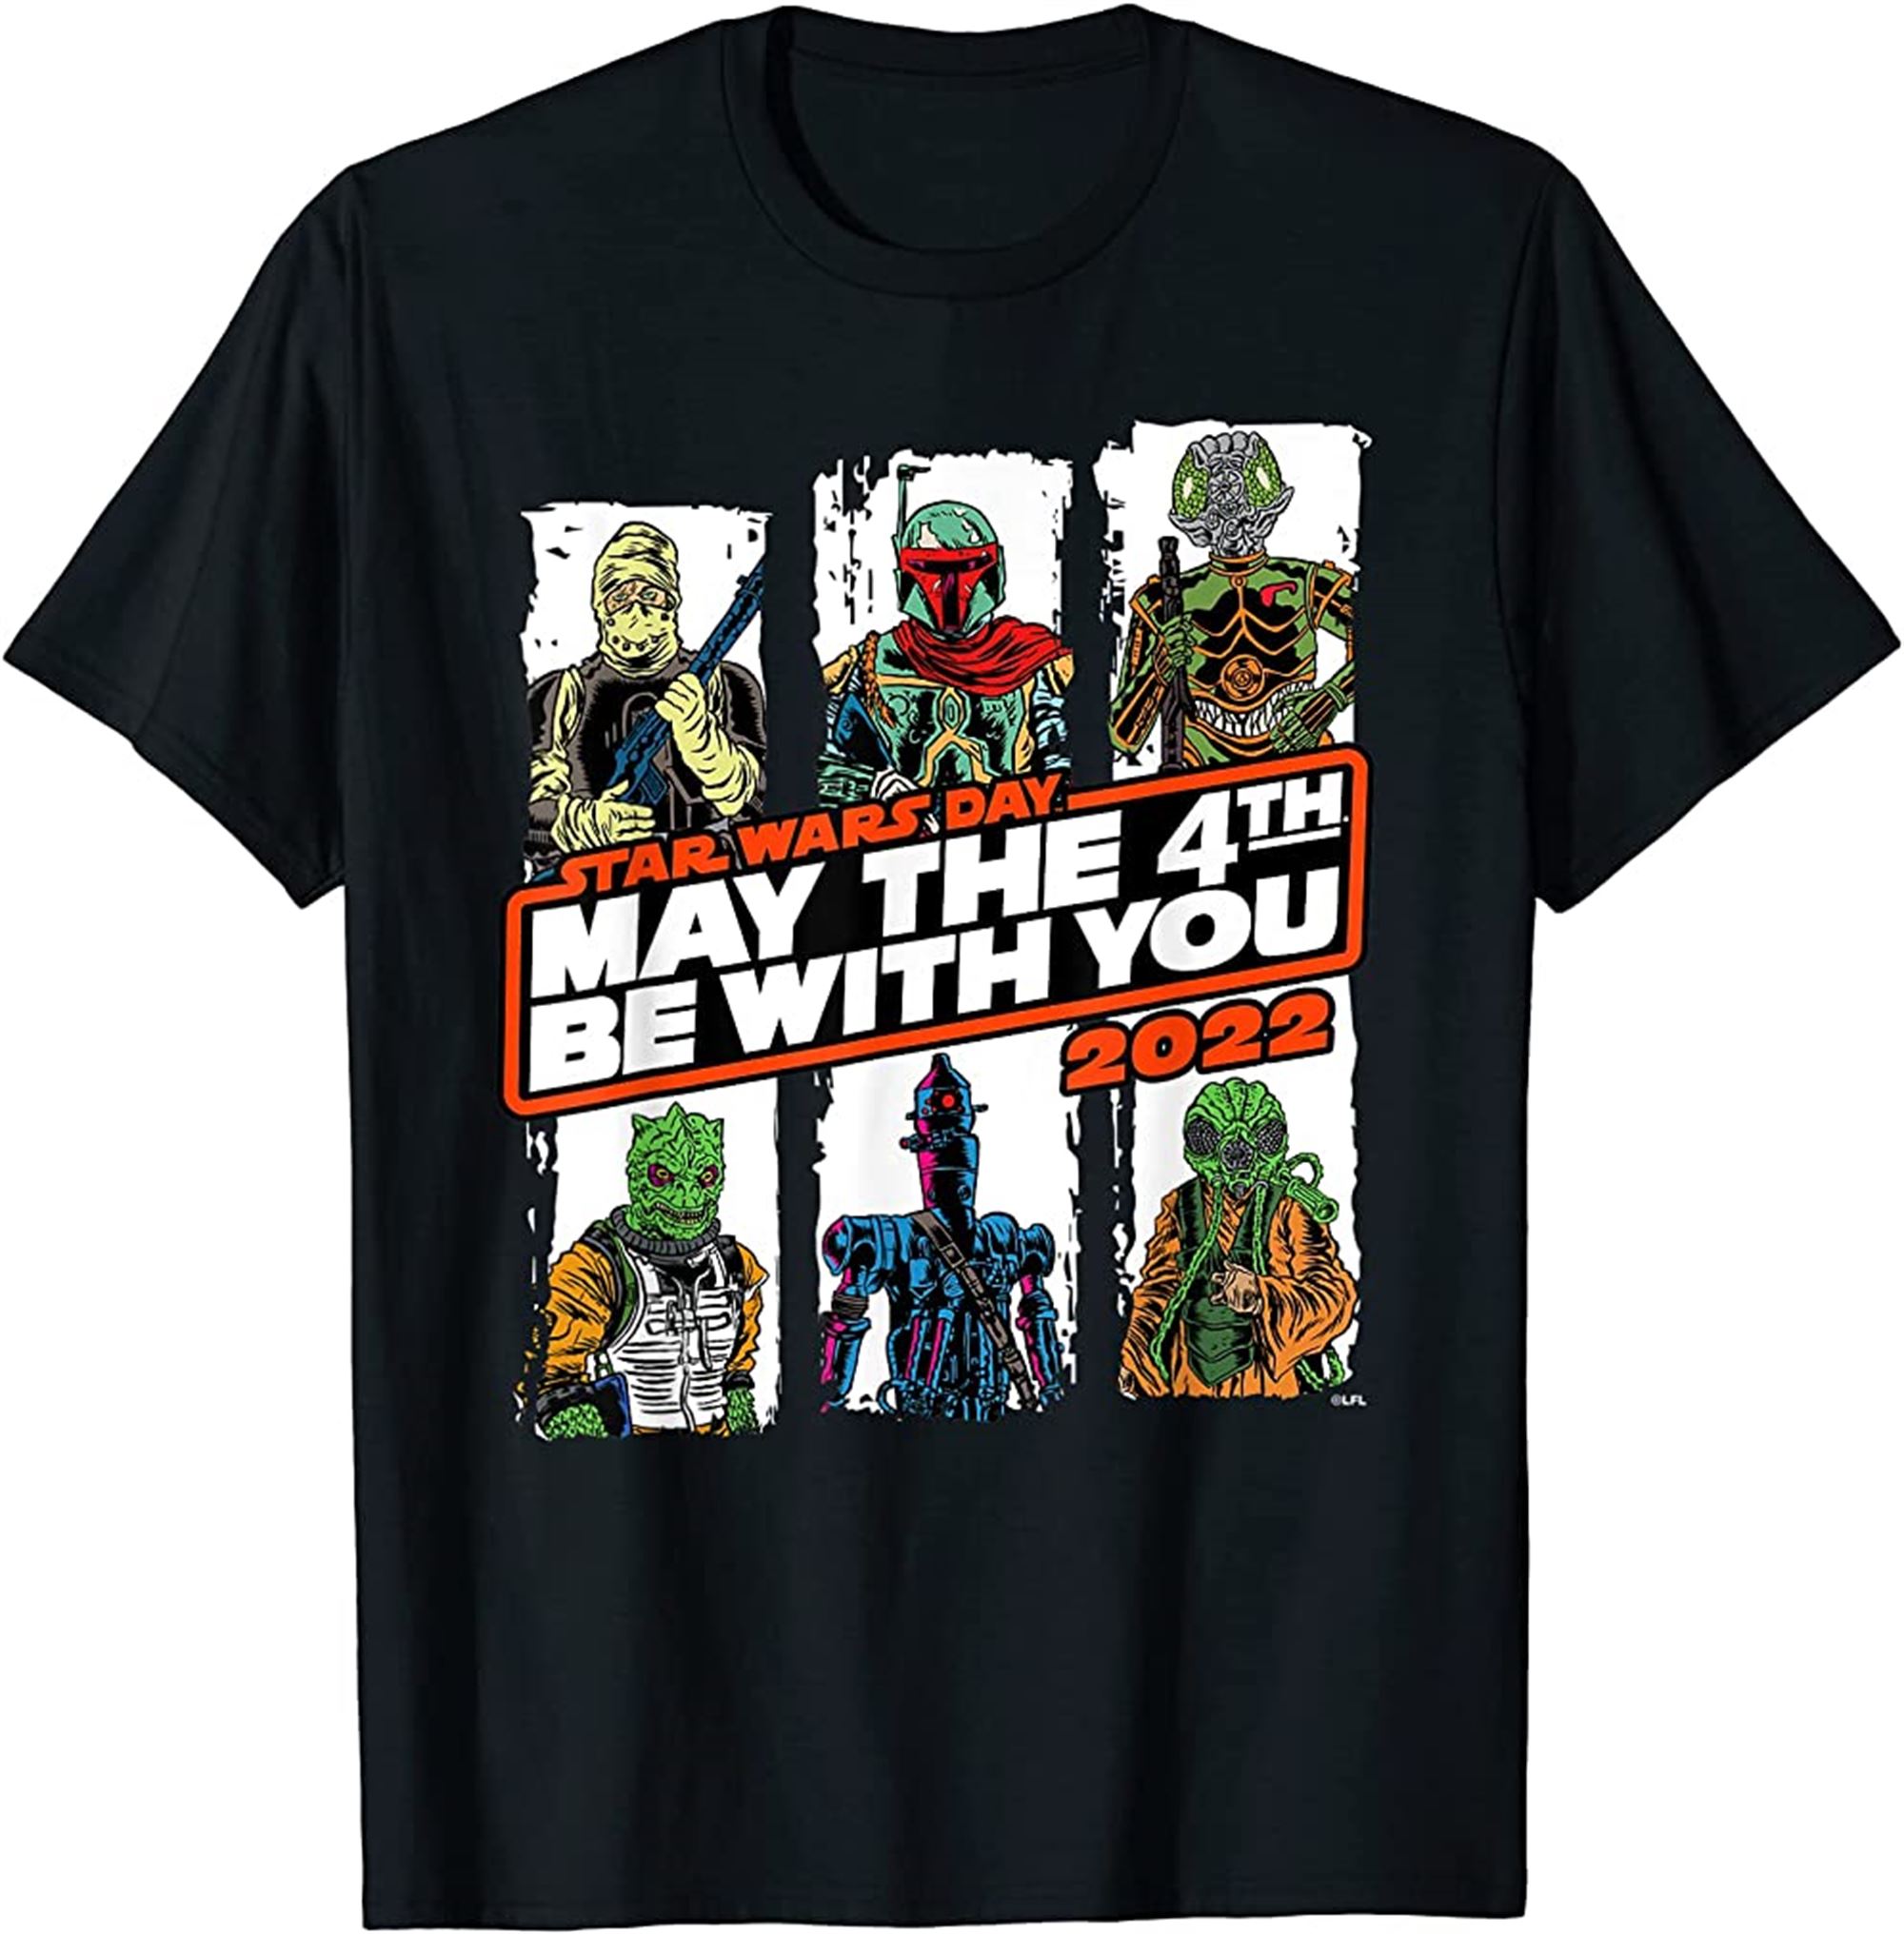 Bounty Hunters May The 4th Be With You 2022 T-shirt Size Up To 5xl